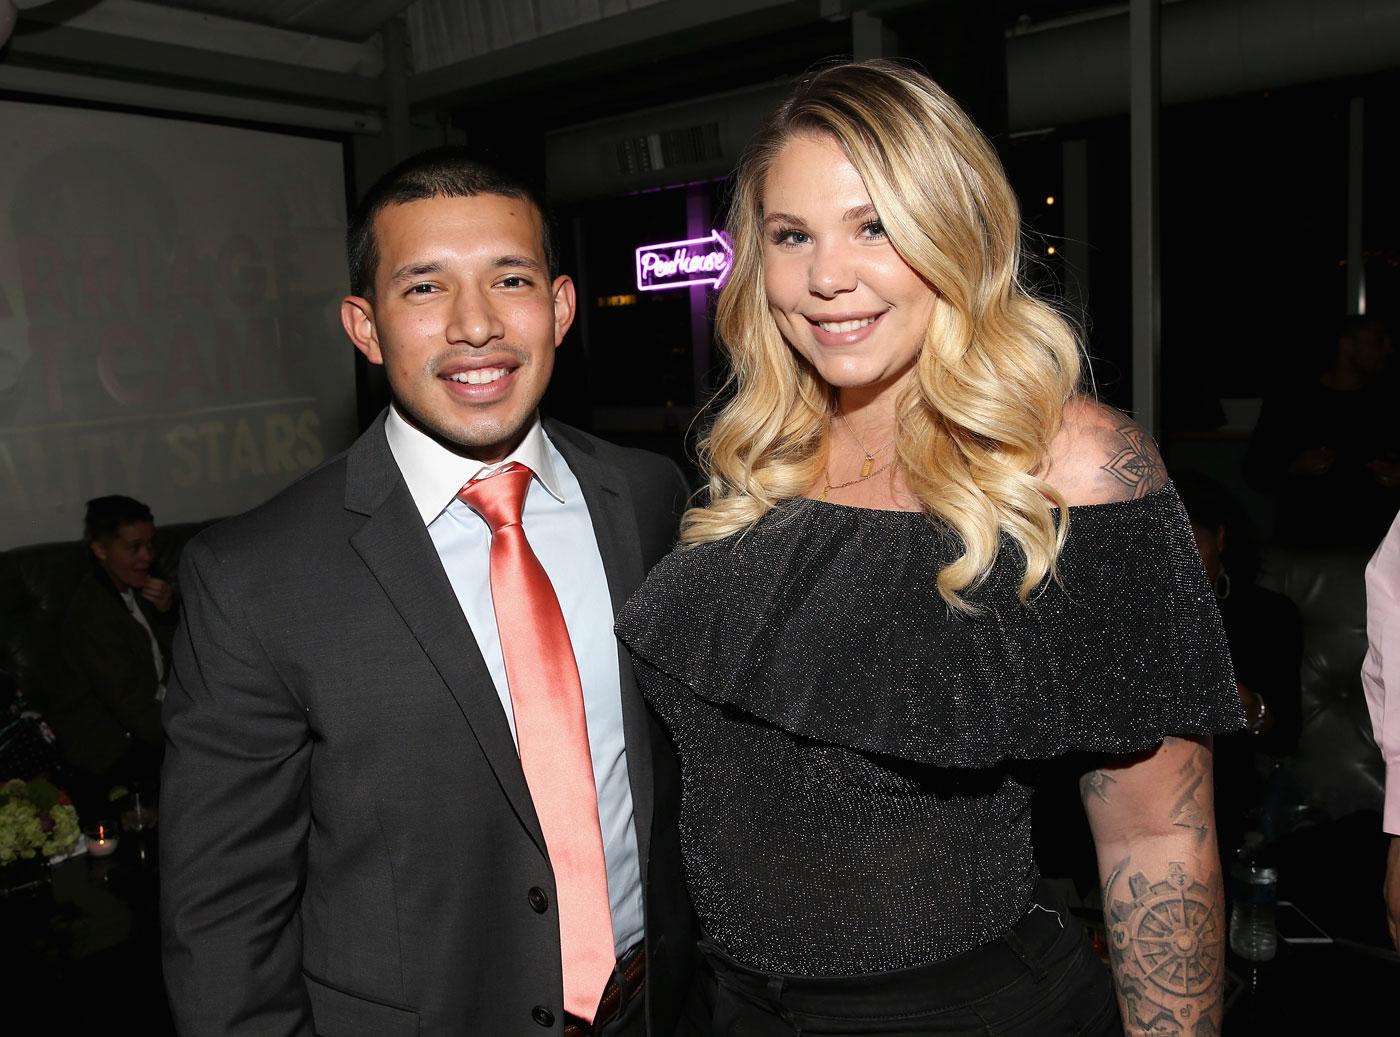 Teen Mom 2 Kailyn Lowry Announces She's Getting Married Again!